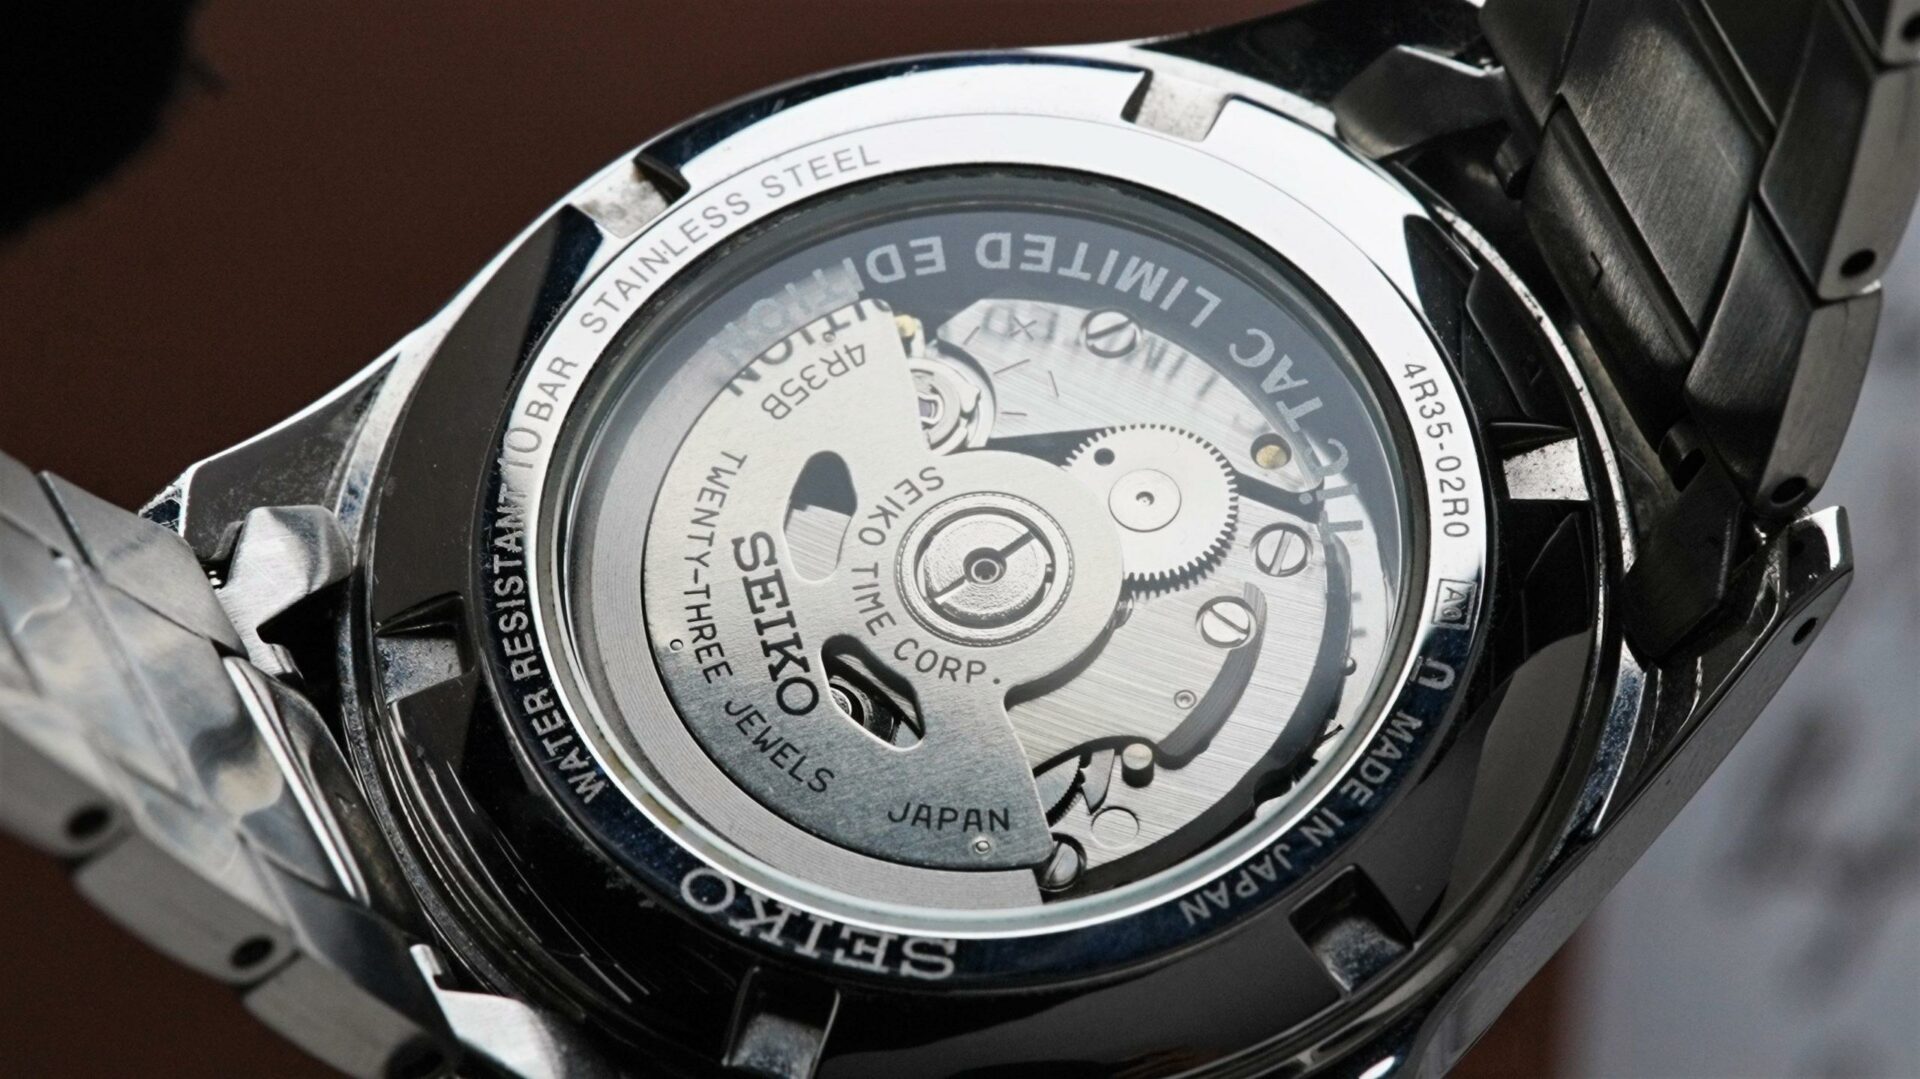 Back side of the Seiko Explorer 1016 Limited Edition.